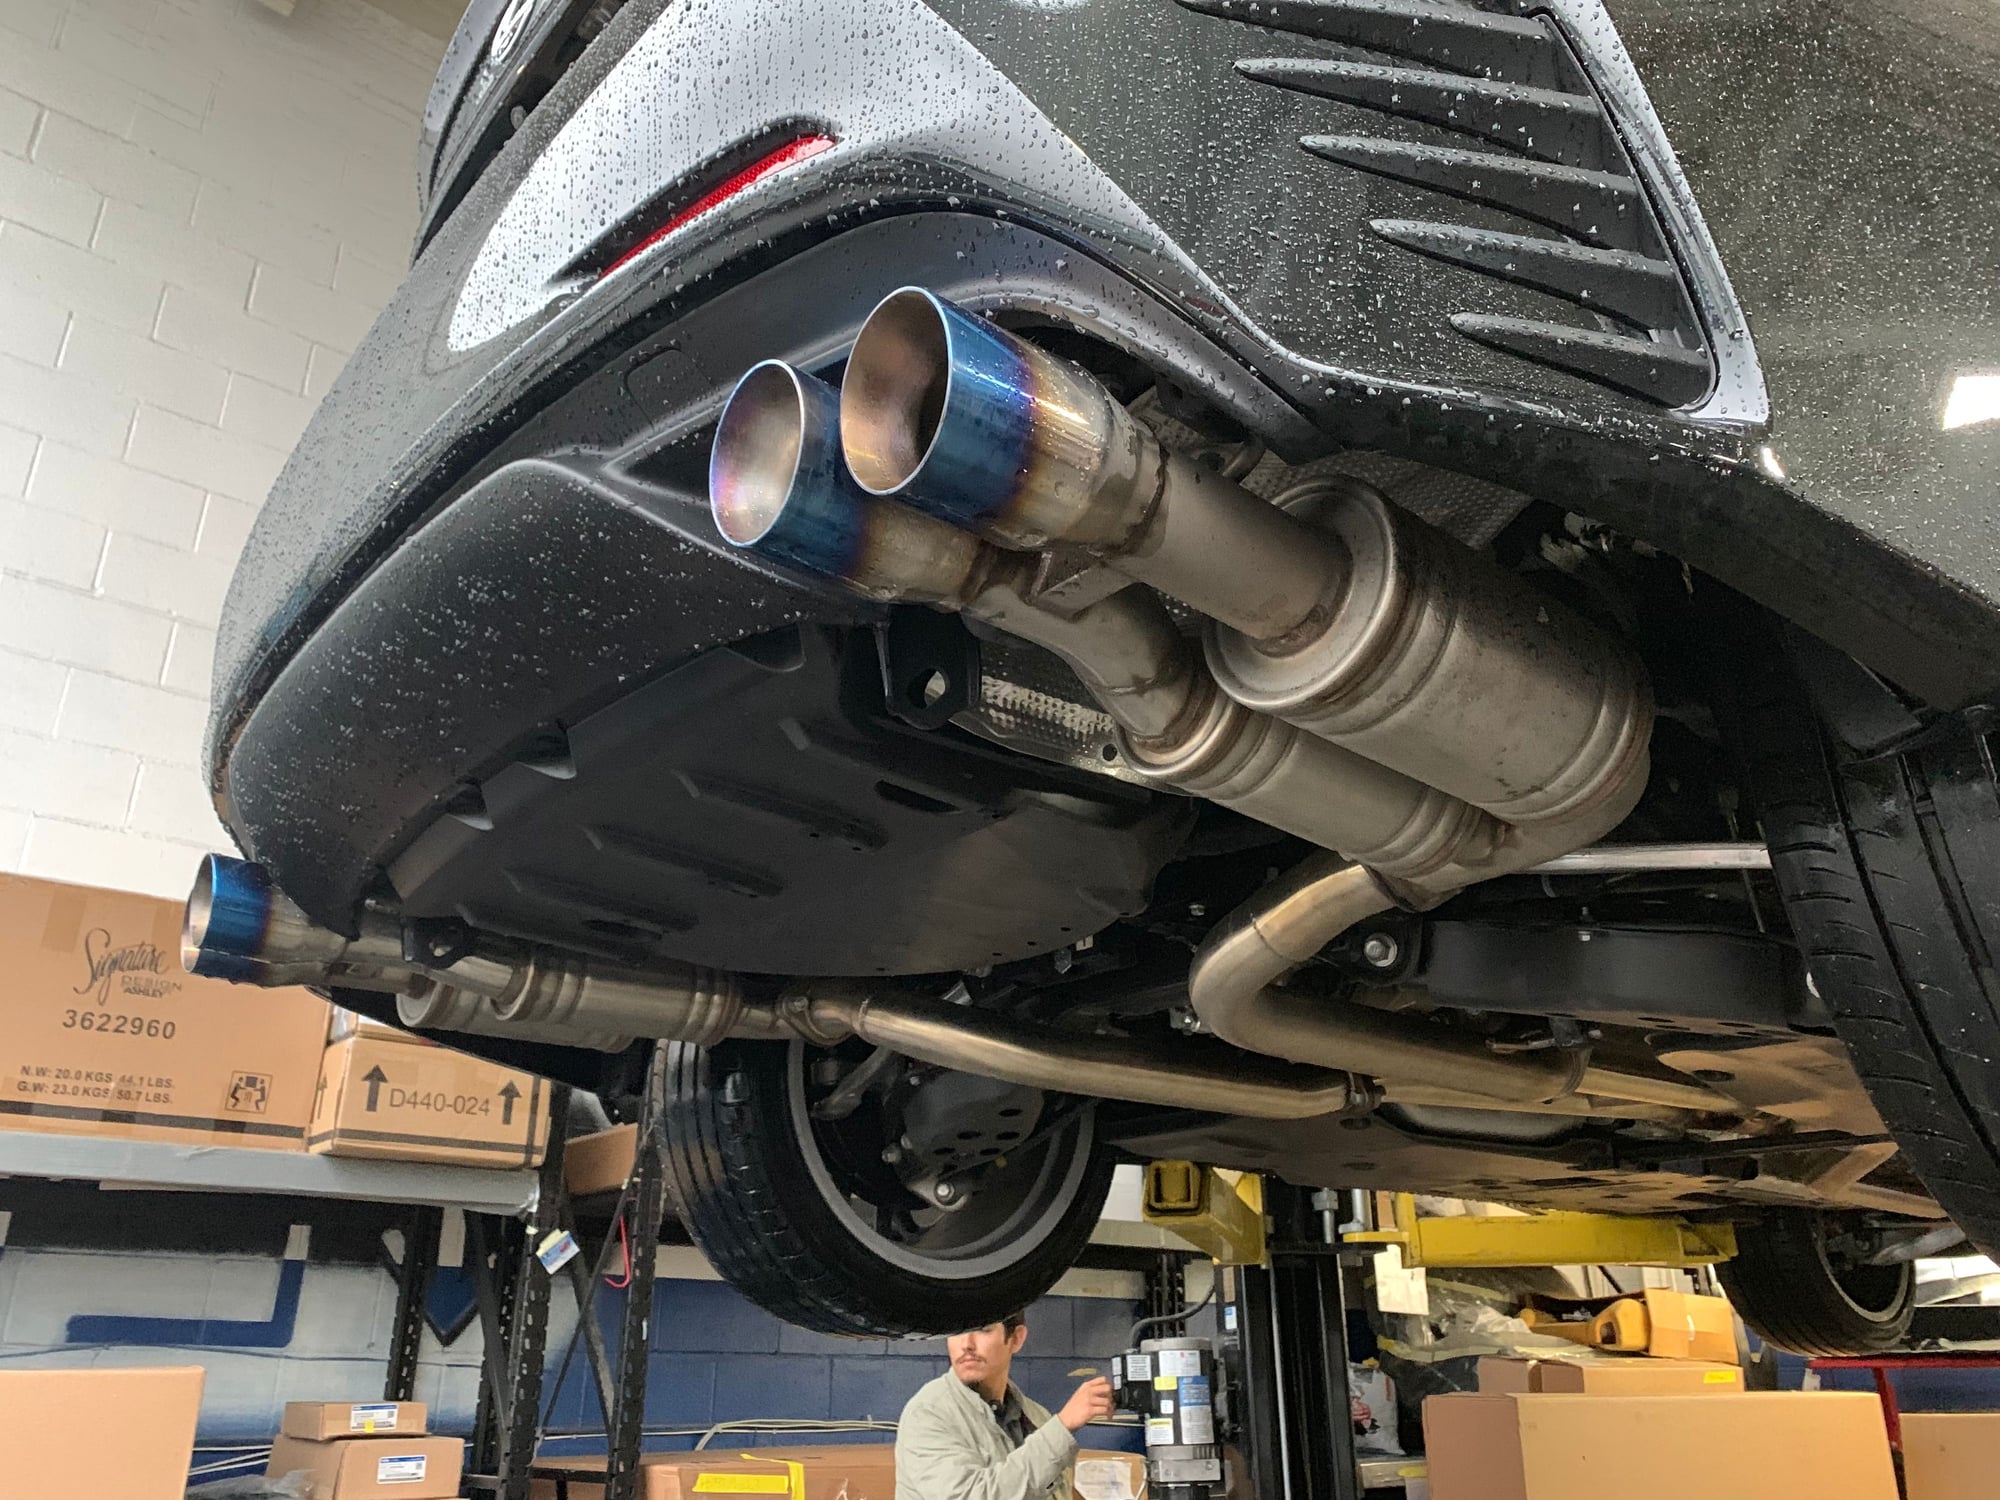 Engine - Exhaust - ARK Performance GRiP Cat-back Exhaust - Used - 2015 to 2018 Lexus RC200t - La Puente, CA 91747, United States